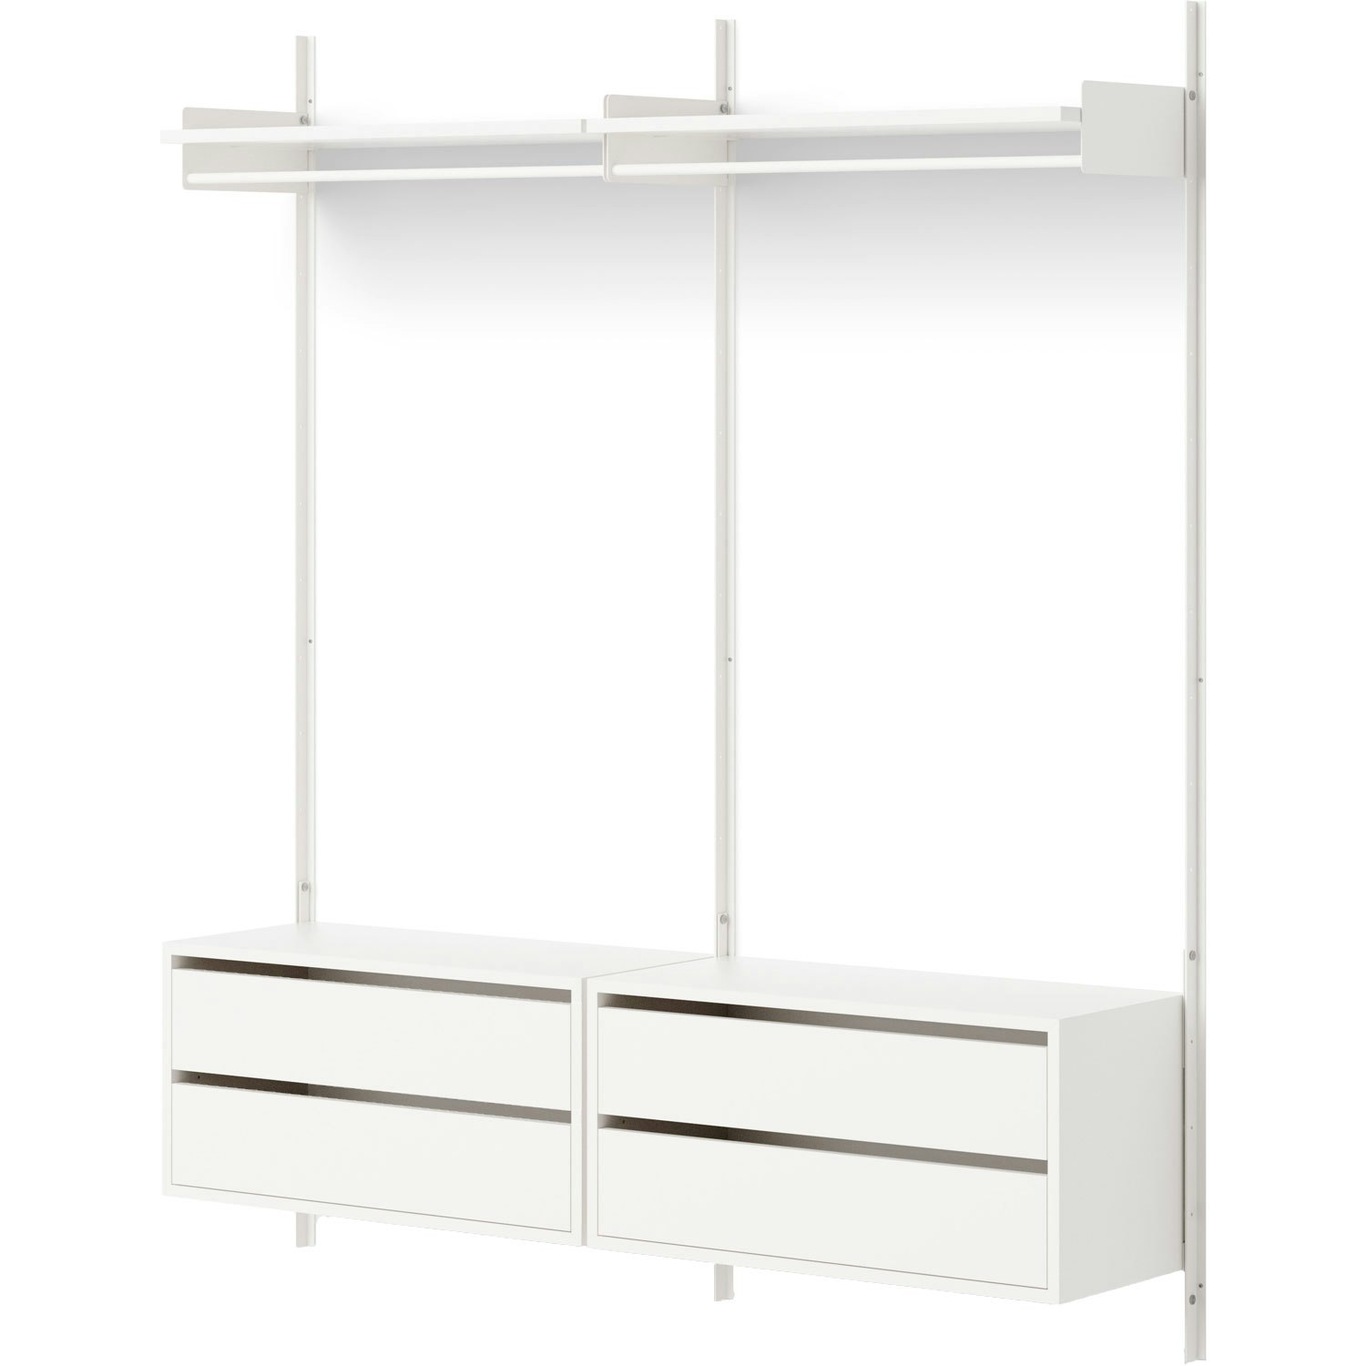 Wardrobe Wall Shelf 2 Cabinets With Drawers, White